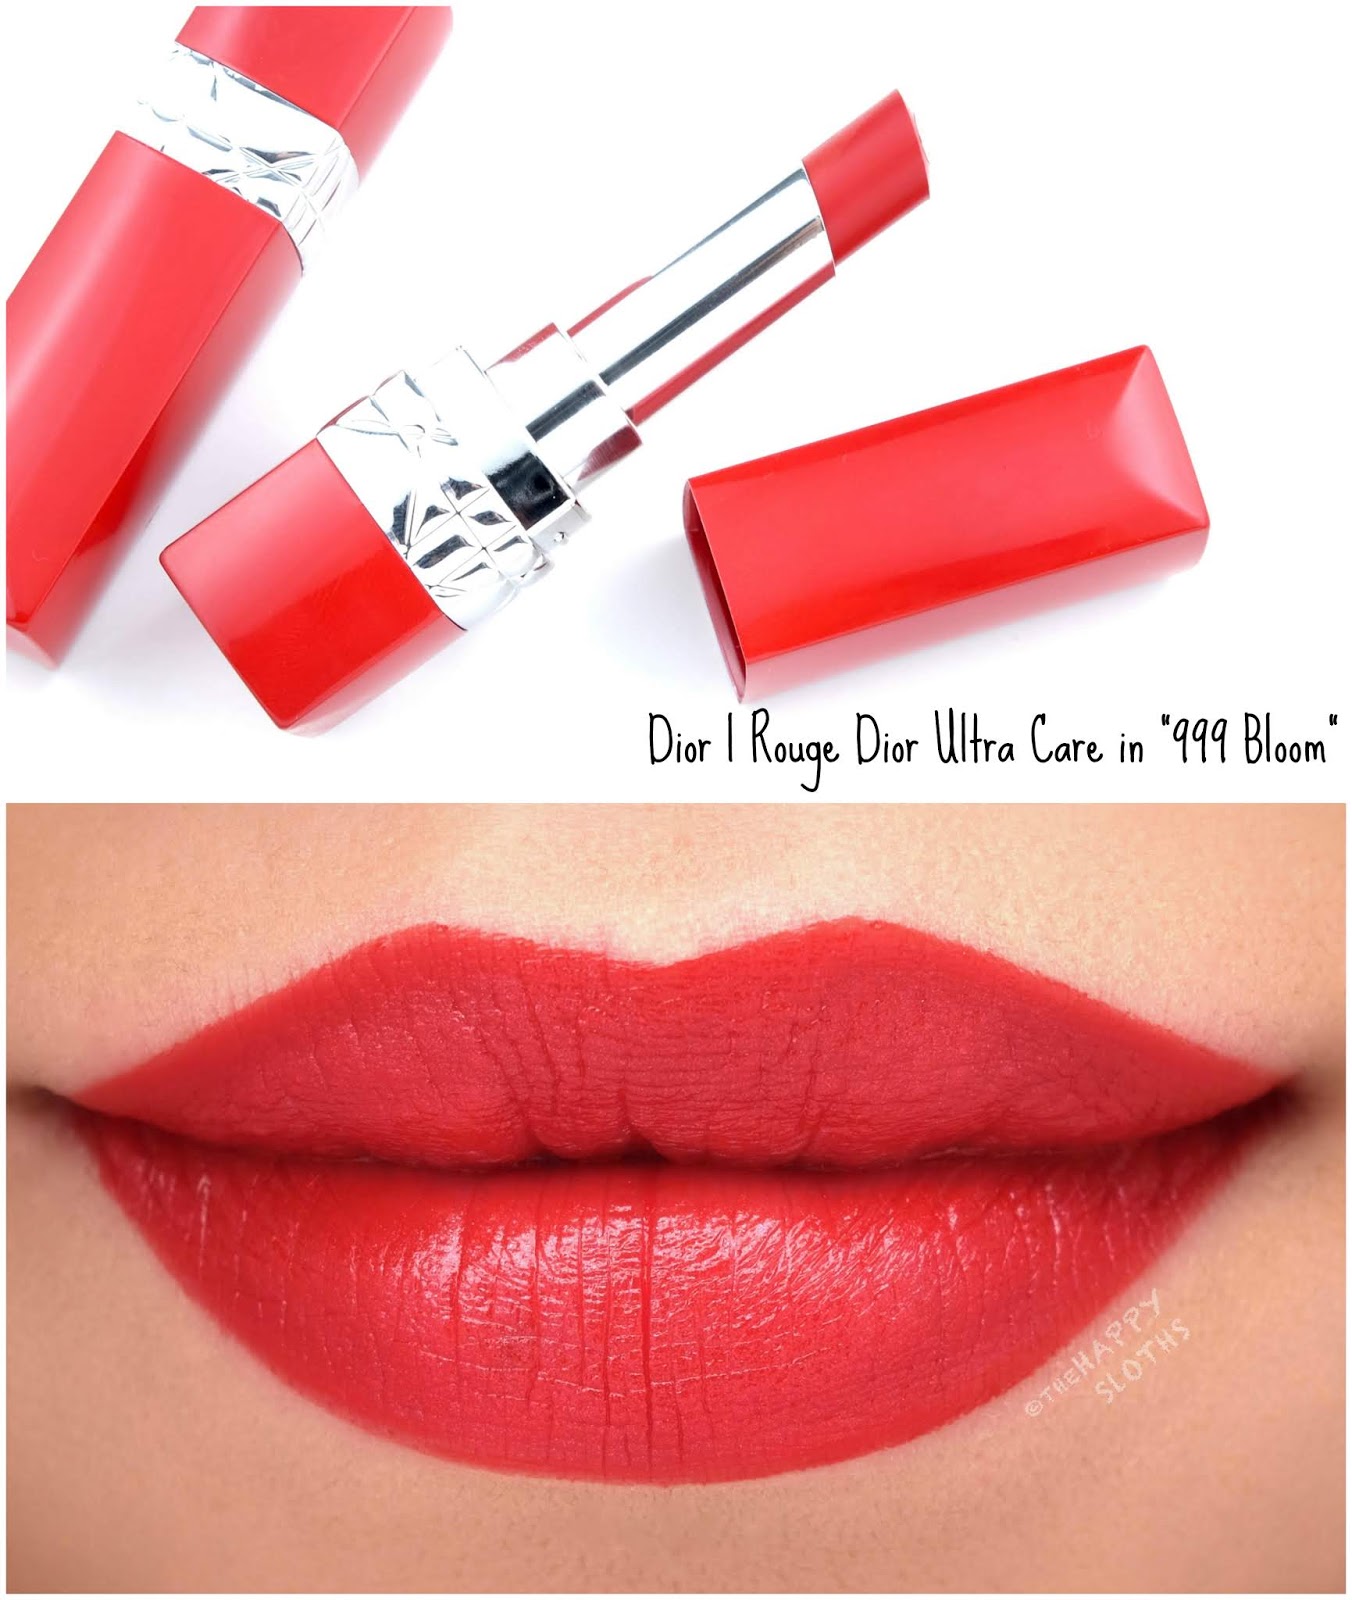 Dior | Rouge Dior Ultra Care Lipstick in "999 Bloom": Review and Swatches